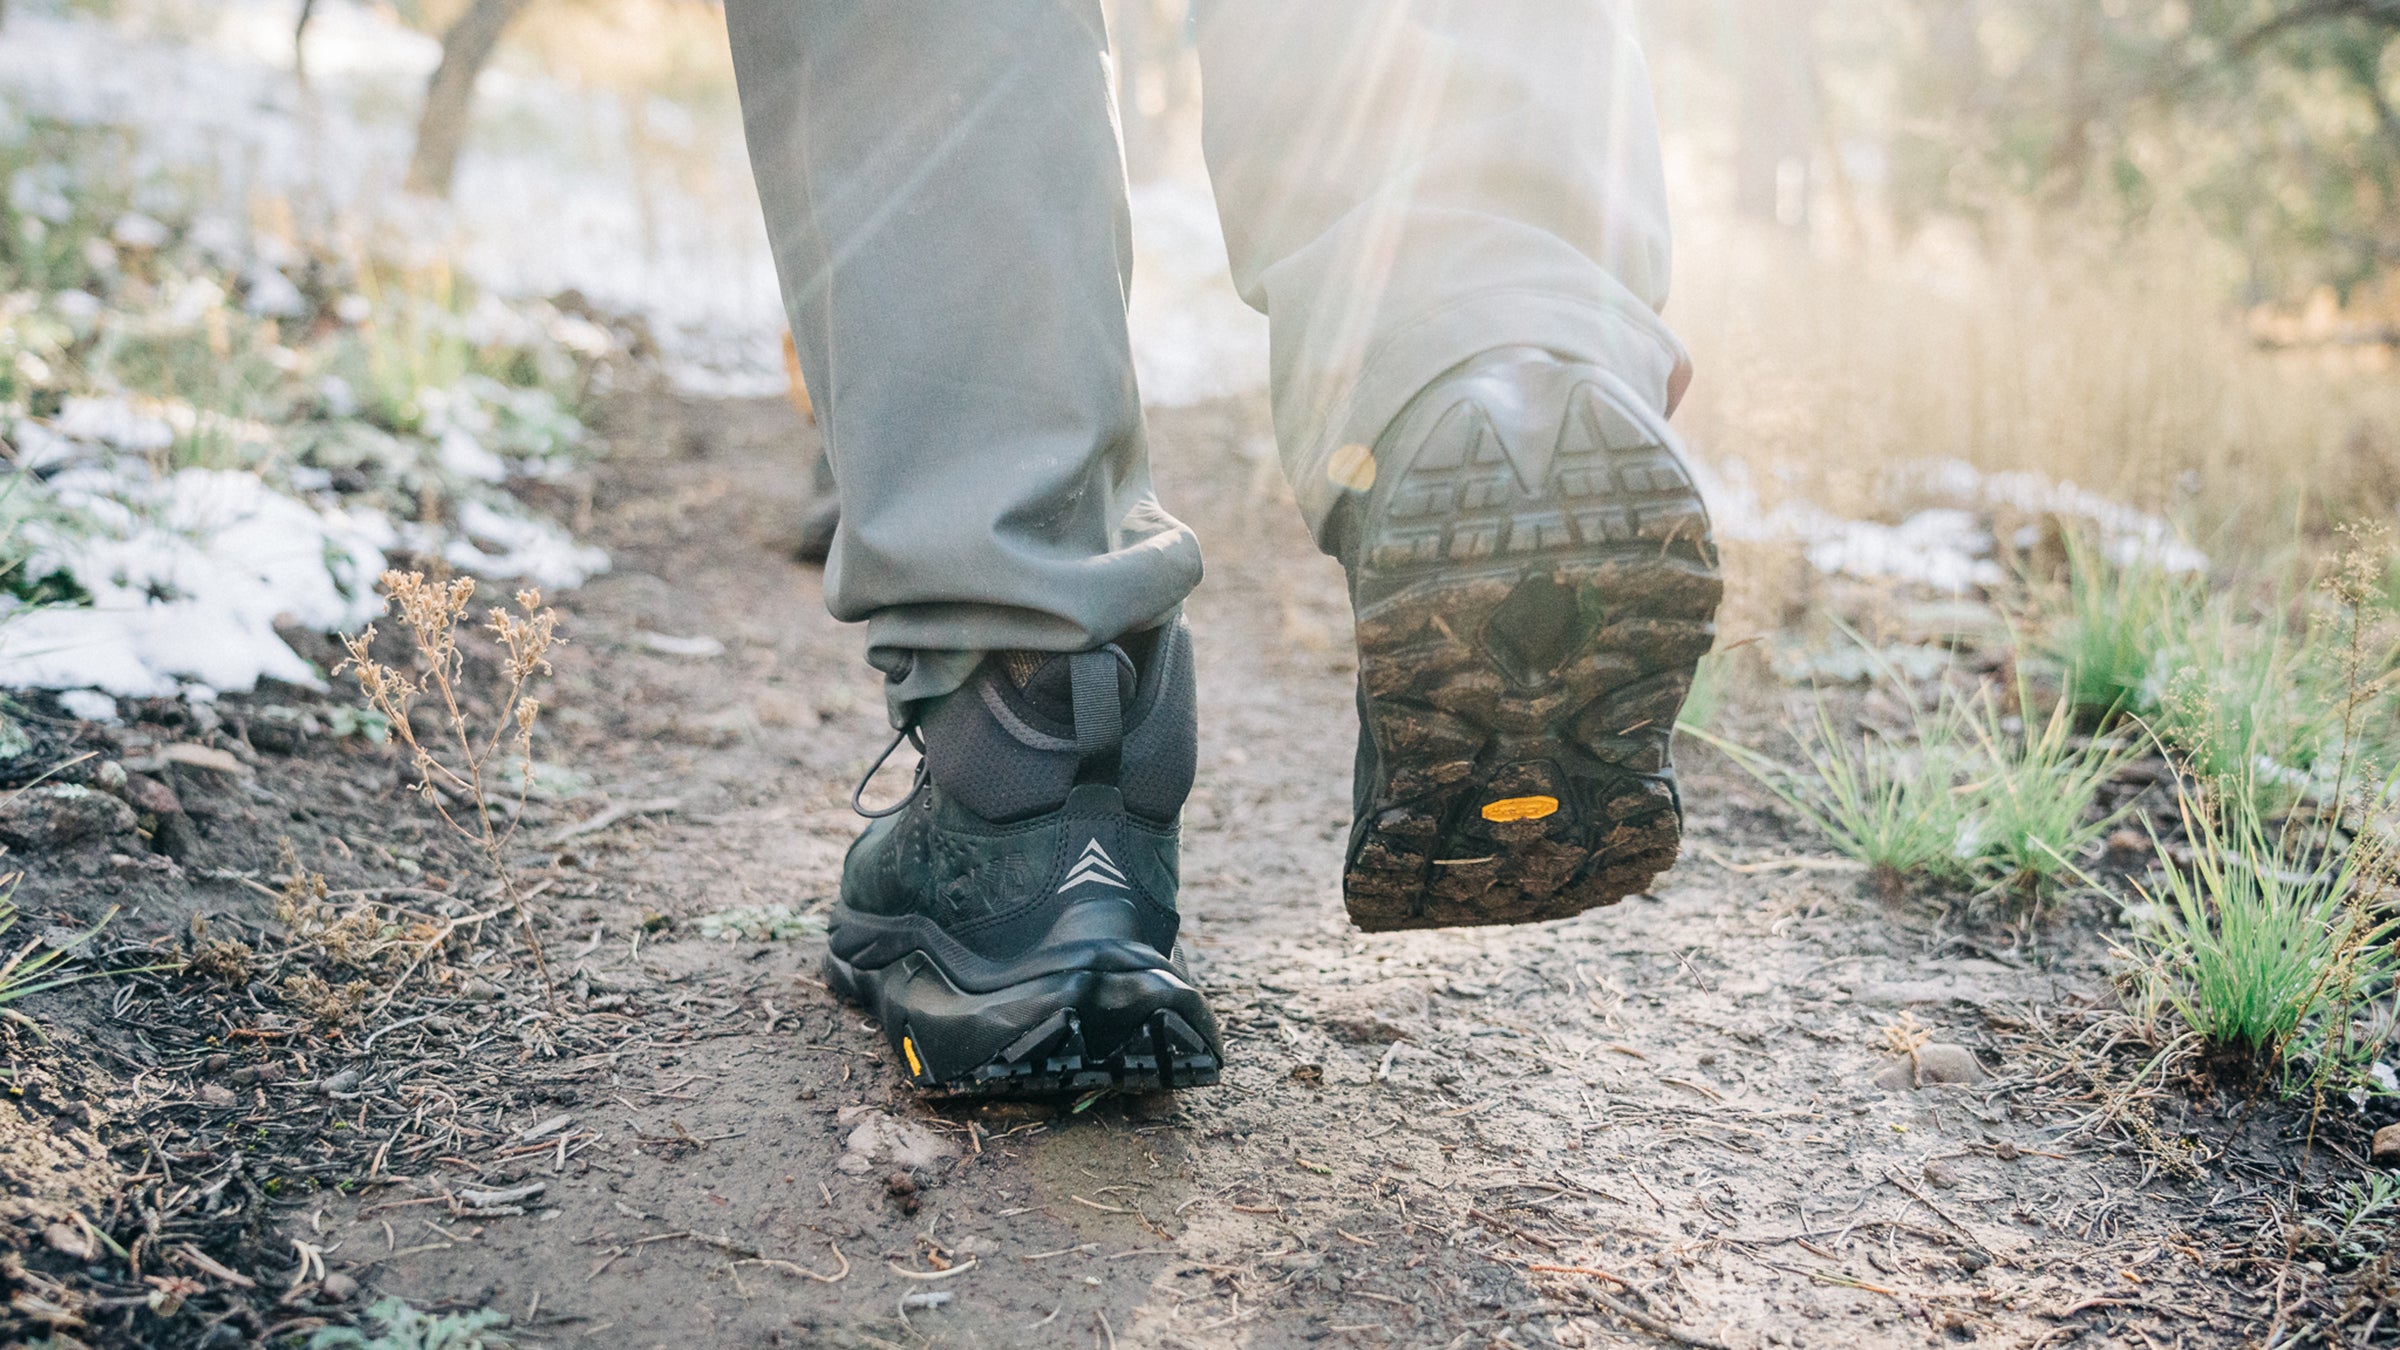 Hiking Boots VS Shoes: What Footwear is Best for a Hike?